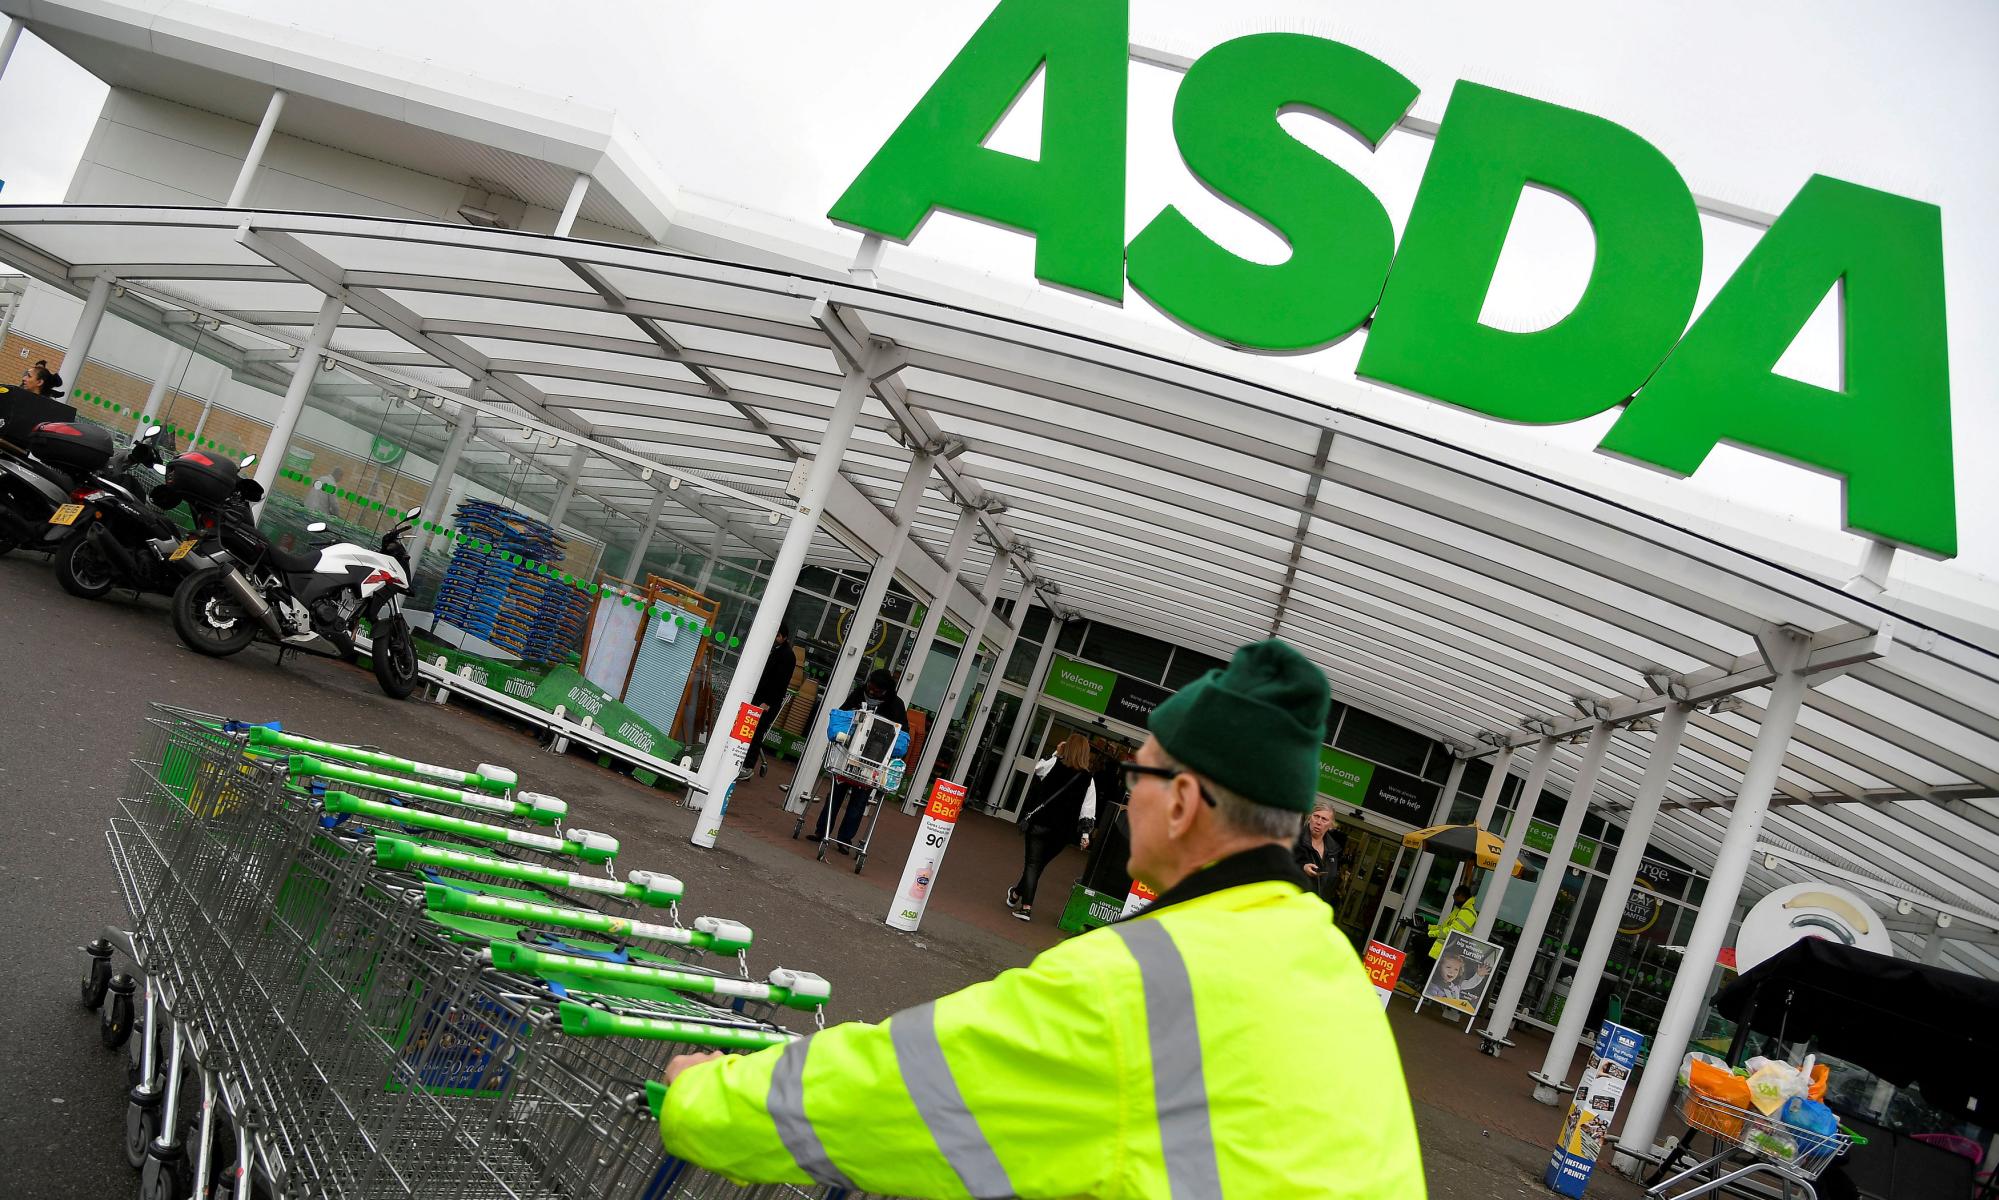 Asda trials refill points and bottle recycling in 'sustainability' store